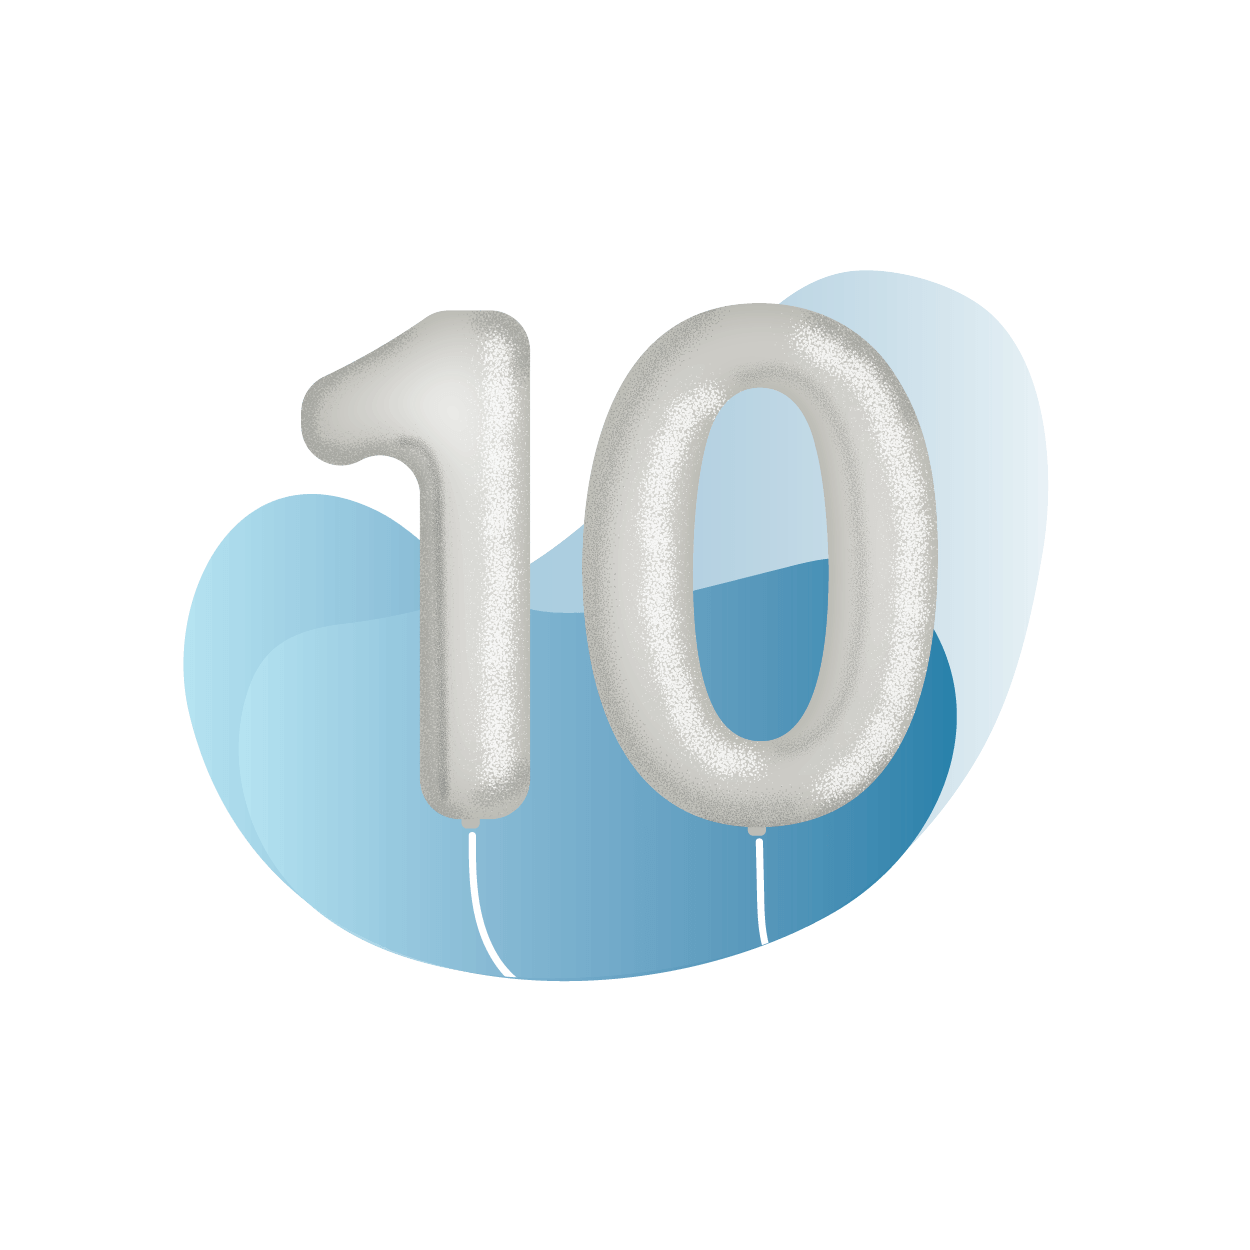 10 balloon signifying Vanguard Charitable's 10th year open